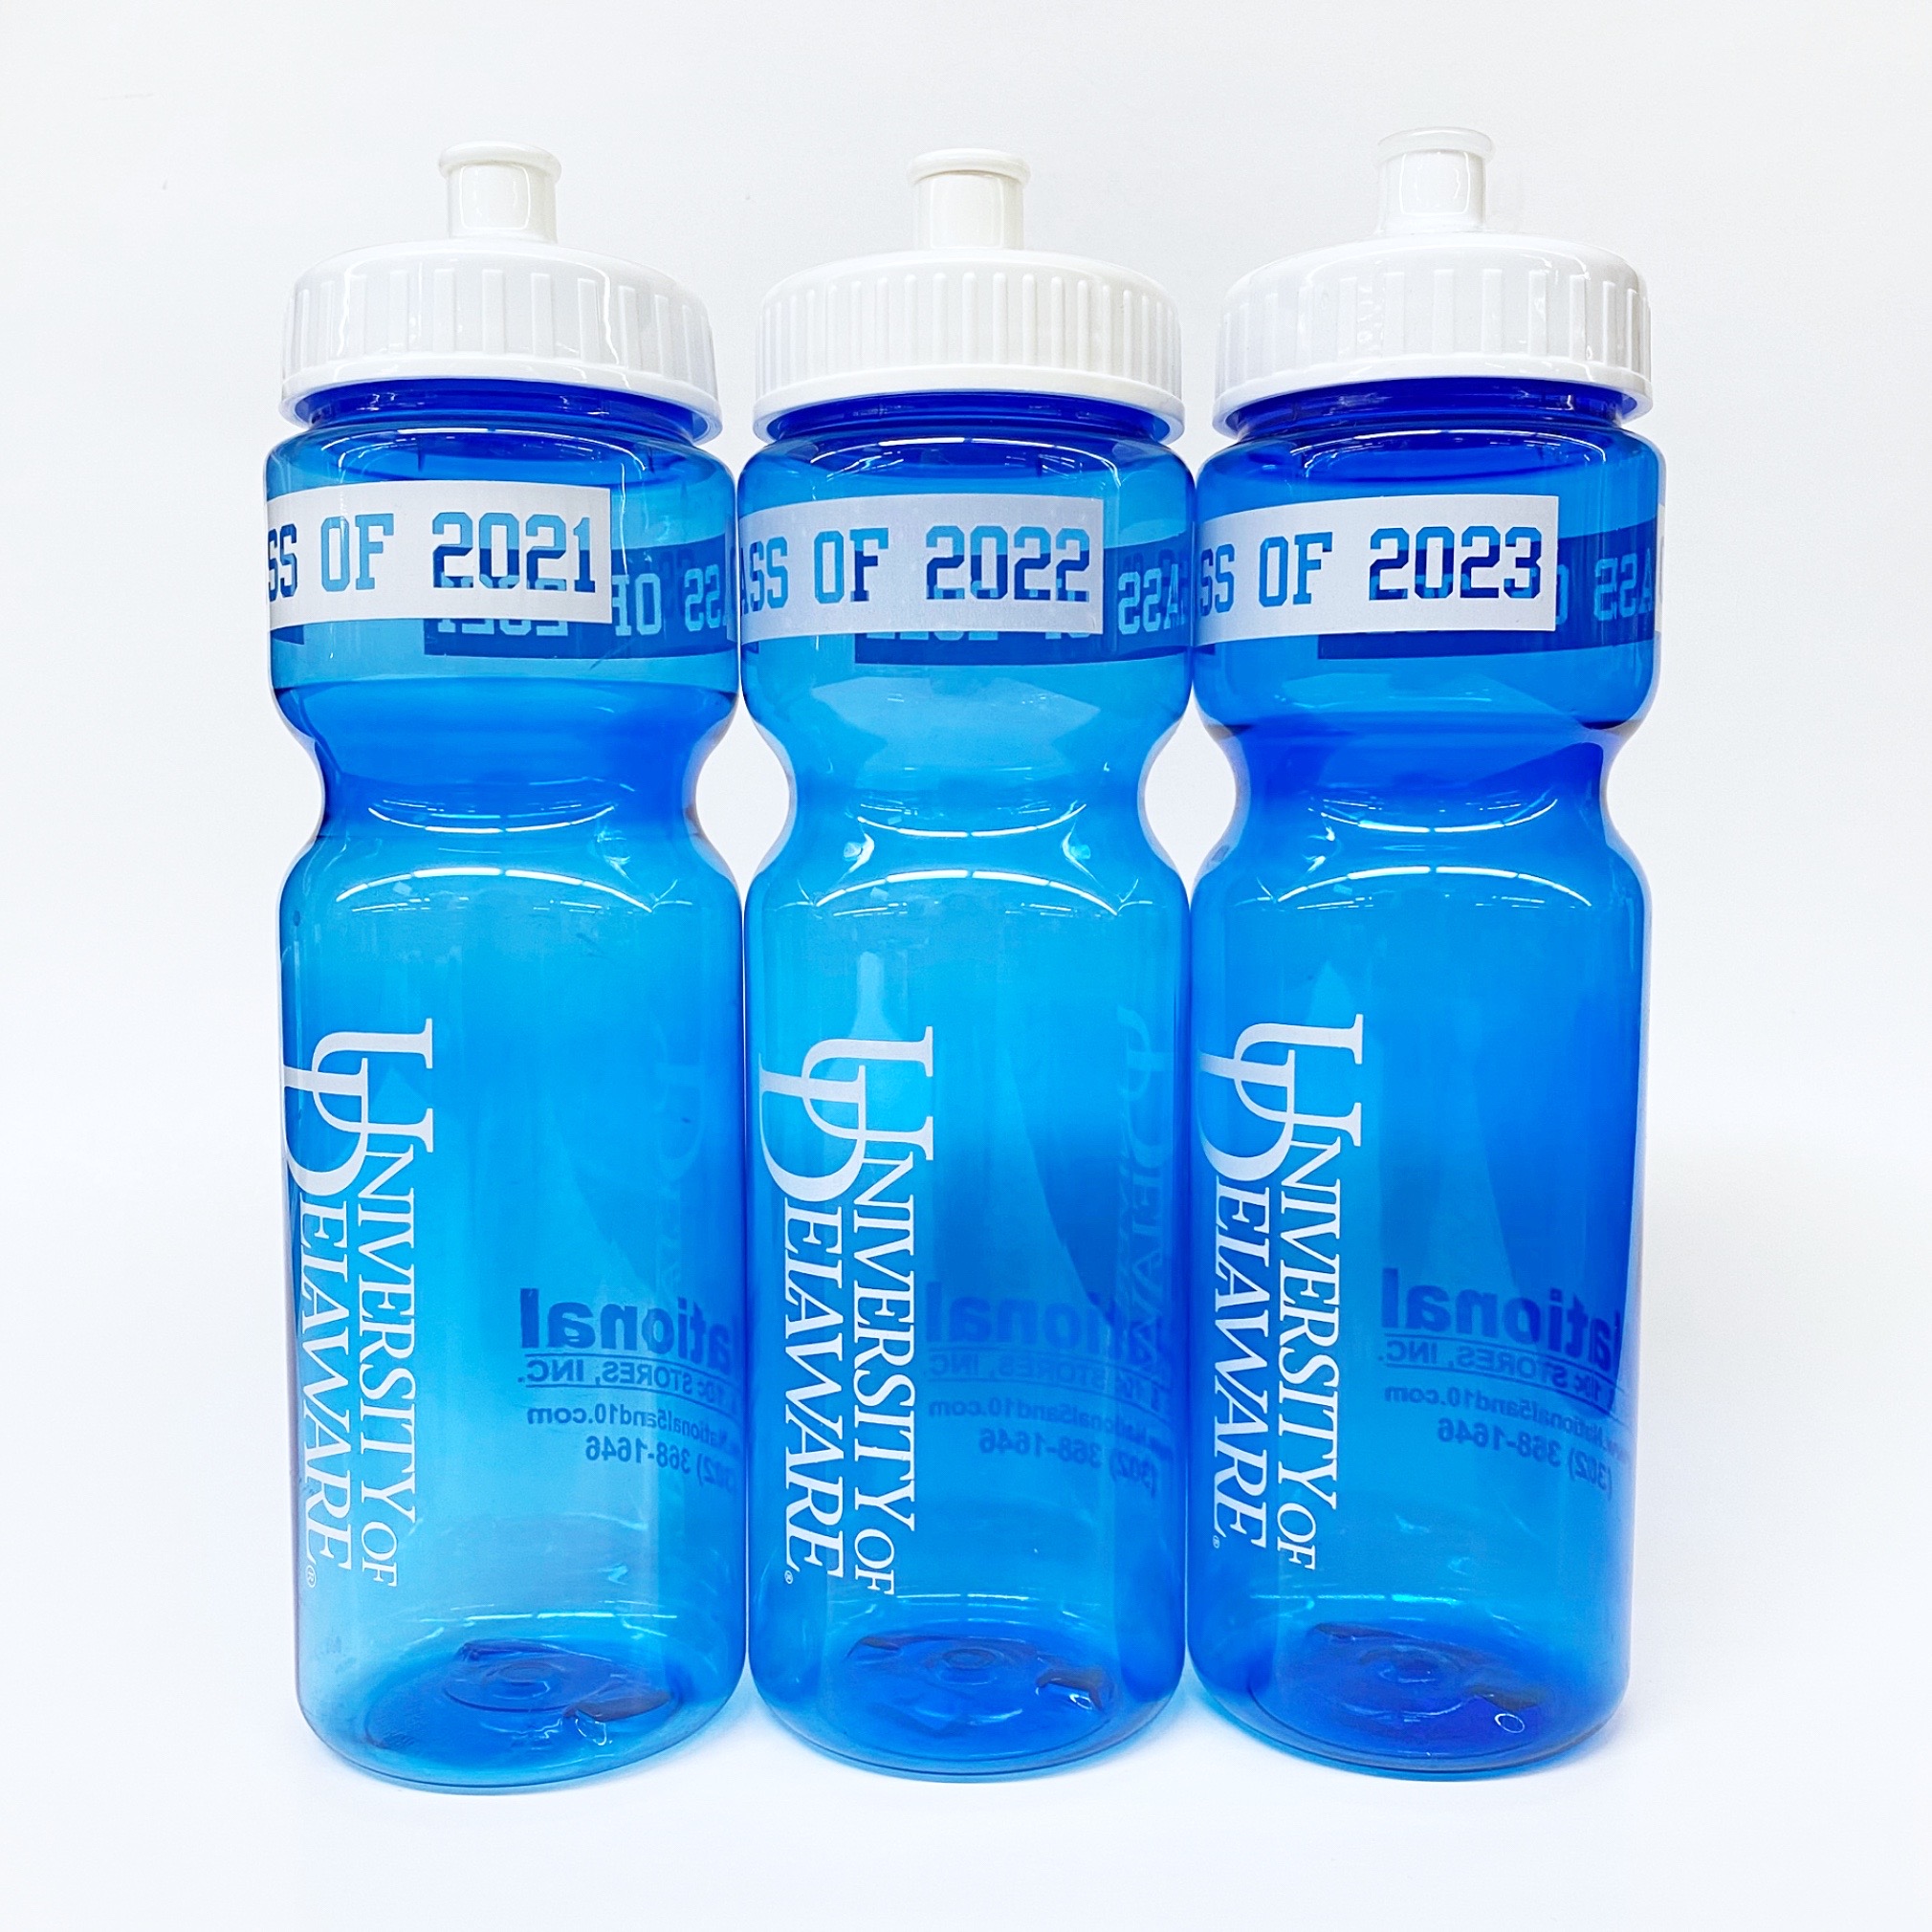 https://www.national5and10.com/wp-content/uploads/2022/04/University-of-Delaware-Class-Of-Water-Bottle-1.jpg